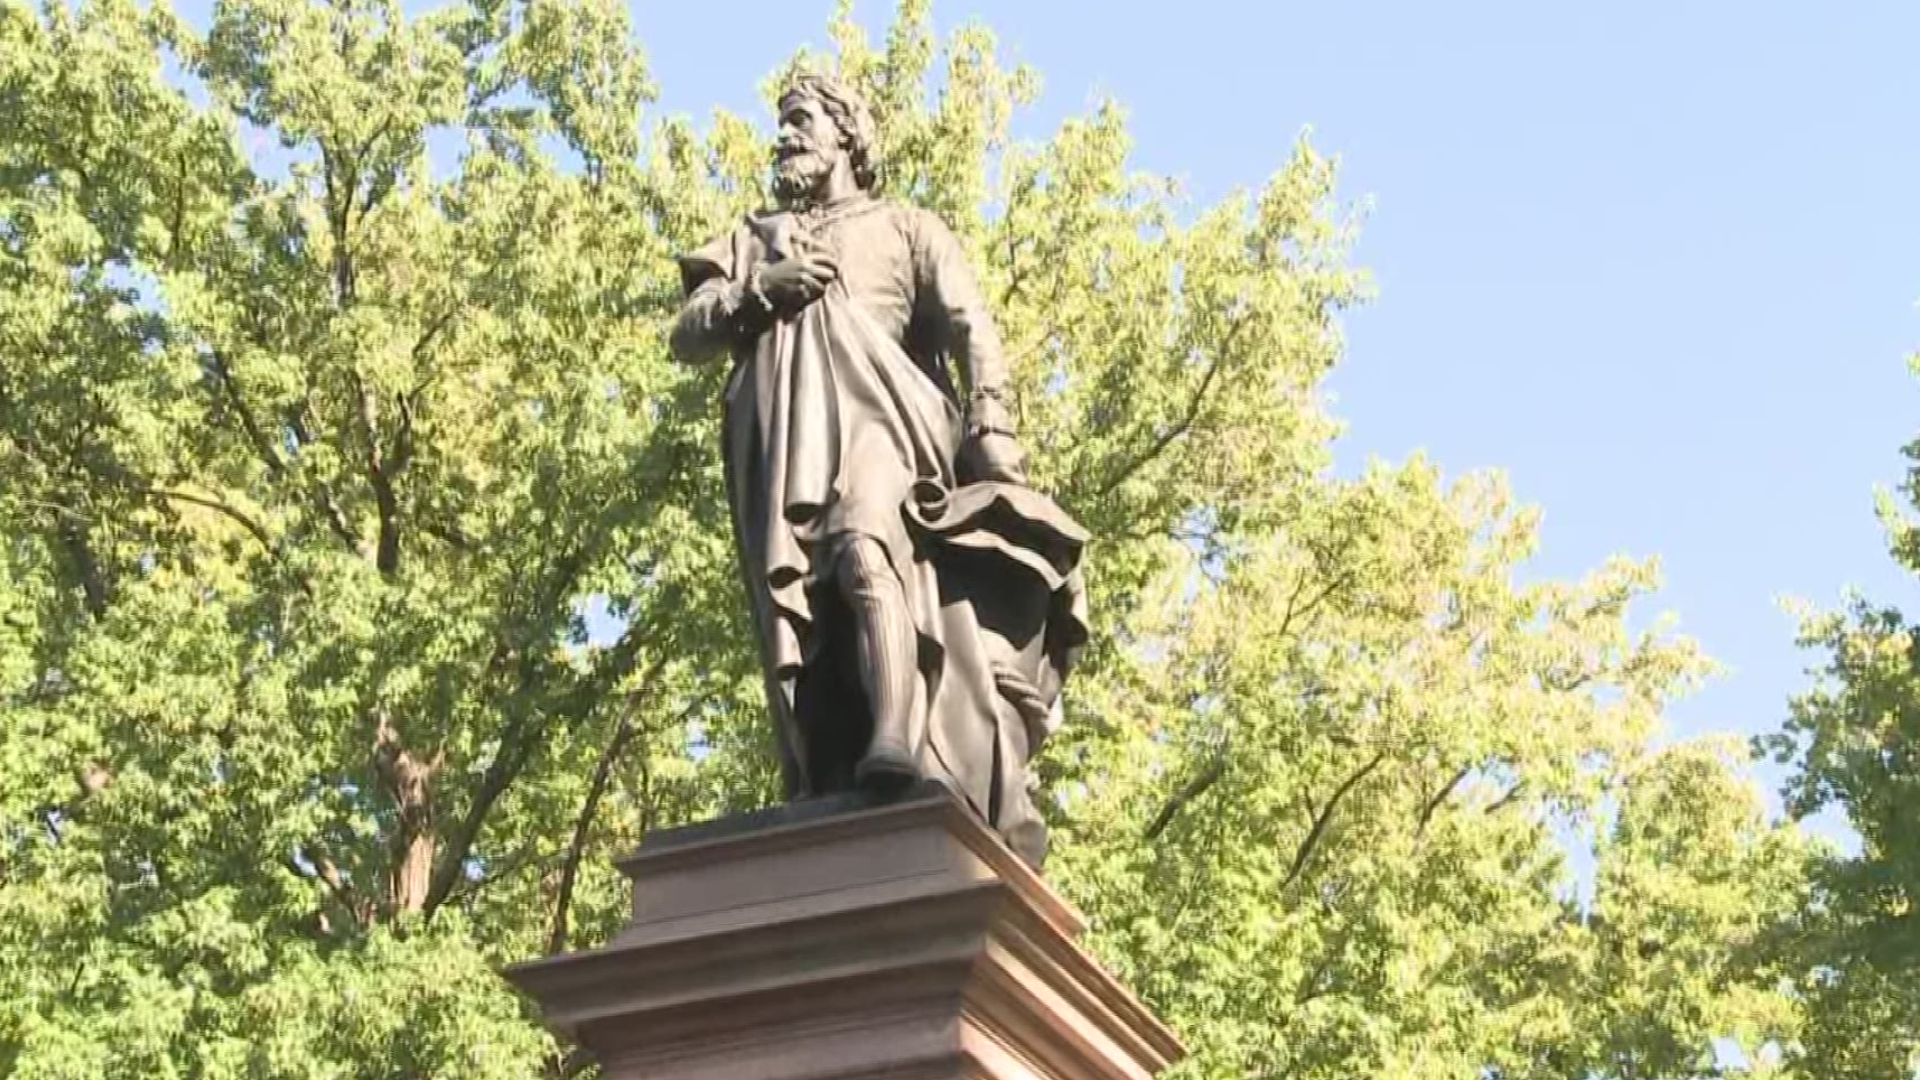 "You know if we can all study and learn about what Columbus really did, then maybe we can come to some kind of conclusion," said St. Louis native Kathy Dickerson.